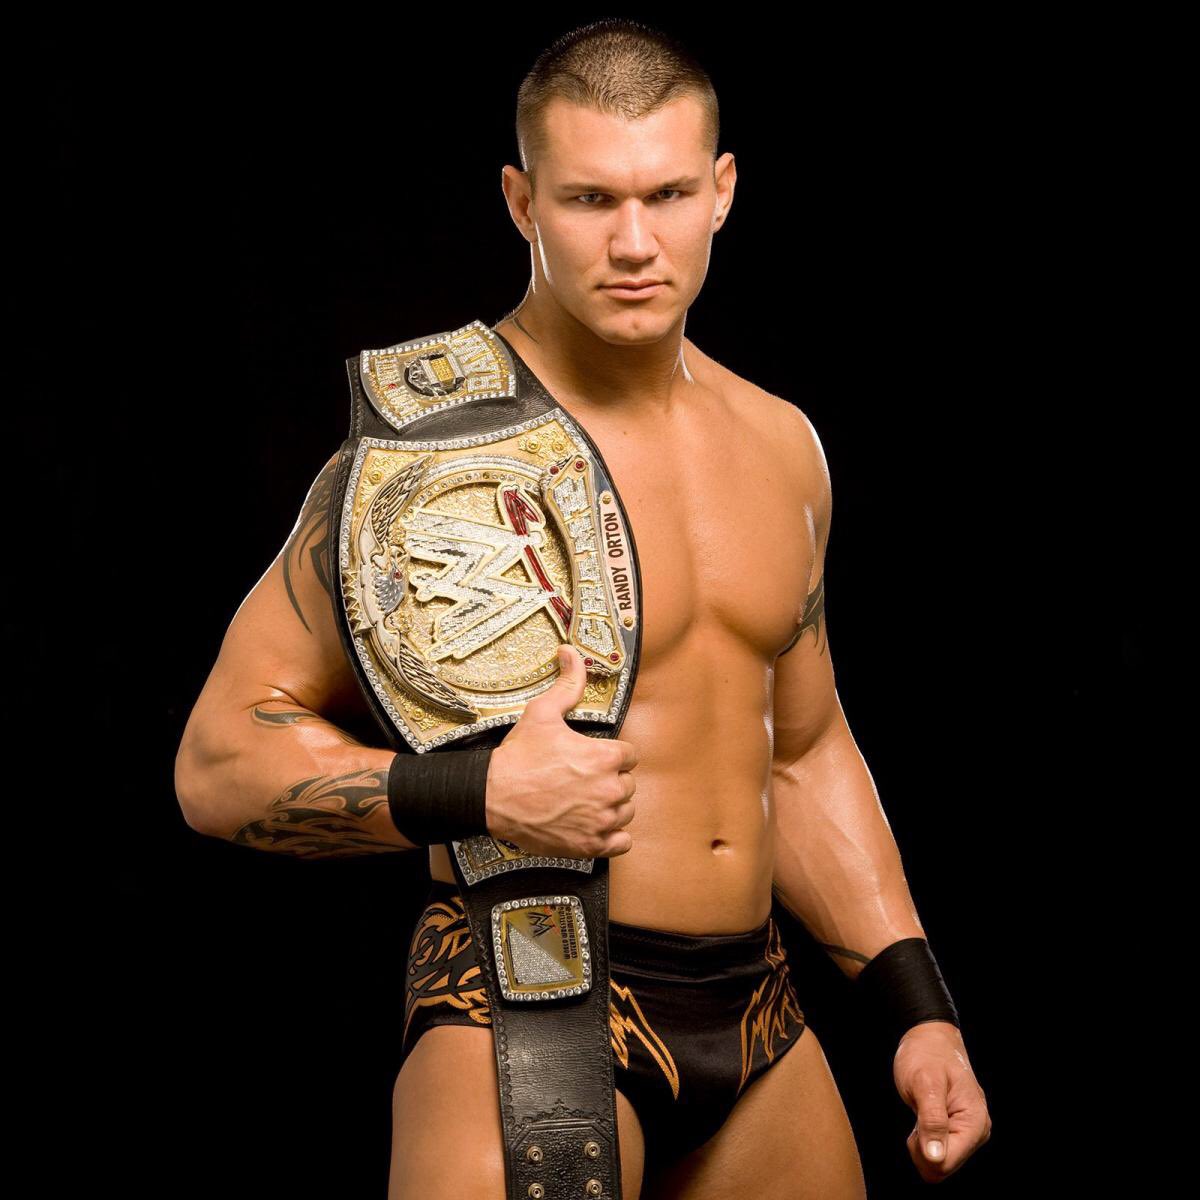 Even without champion’s advantage, Cena’s reign would end almost a year before ending on September 17 2007 at Unforgiven.Cena would be disqualified after repeatedly ignoring the referee’s instructions giving Randy Orton his 1st WWE Championship. #WWE  #AlternateHistory